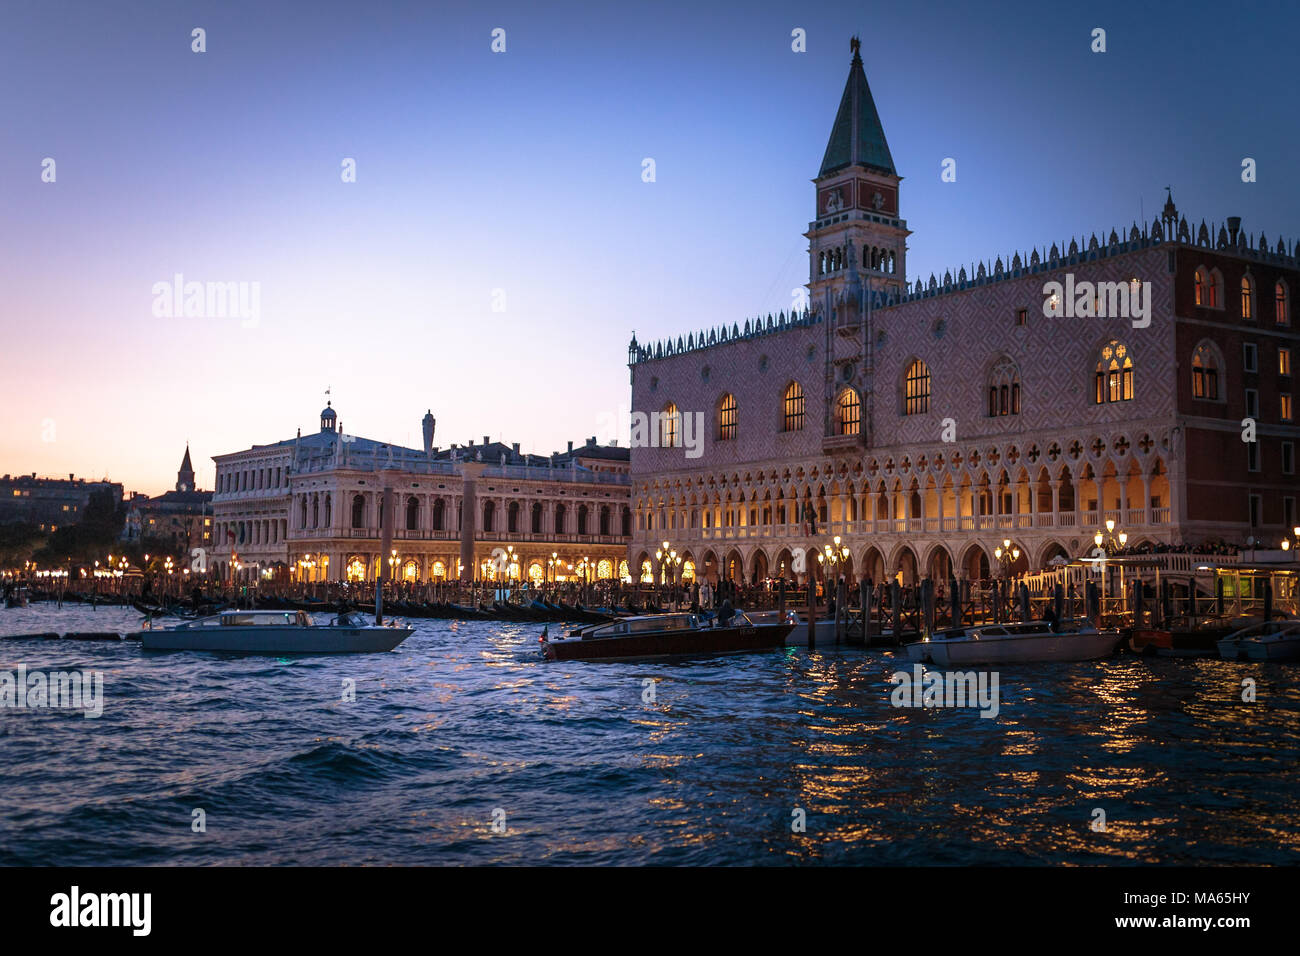 Venice (Italy) - Ducal Palace and San Marco Square seen from Venice Lagoon at night Stock Photo